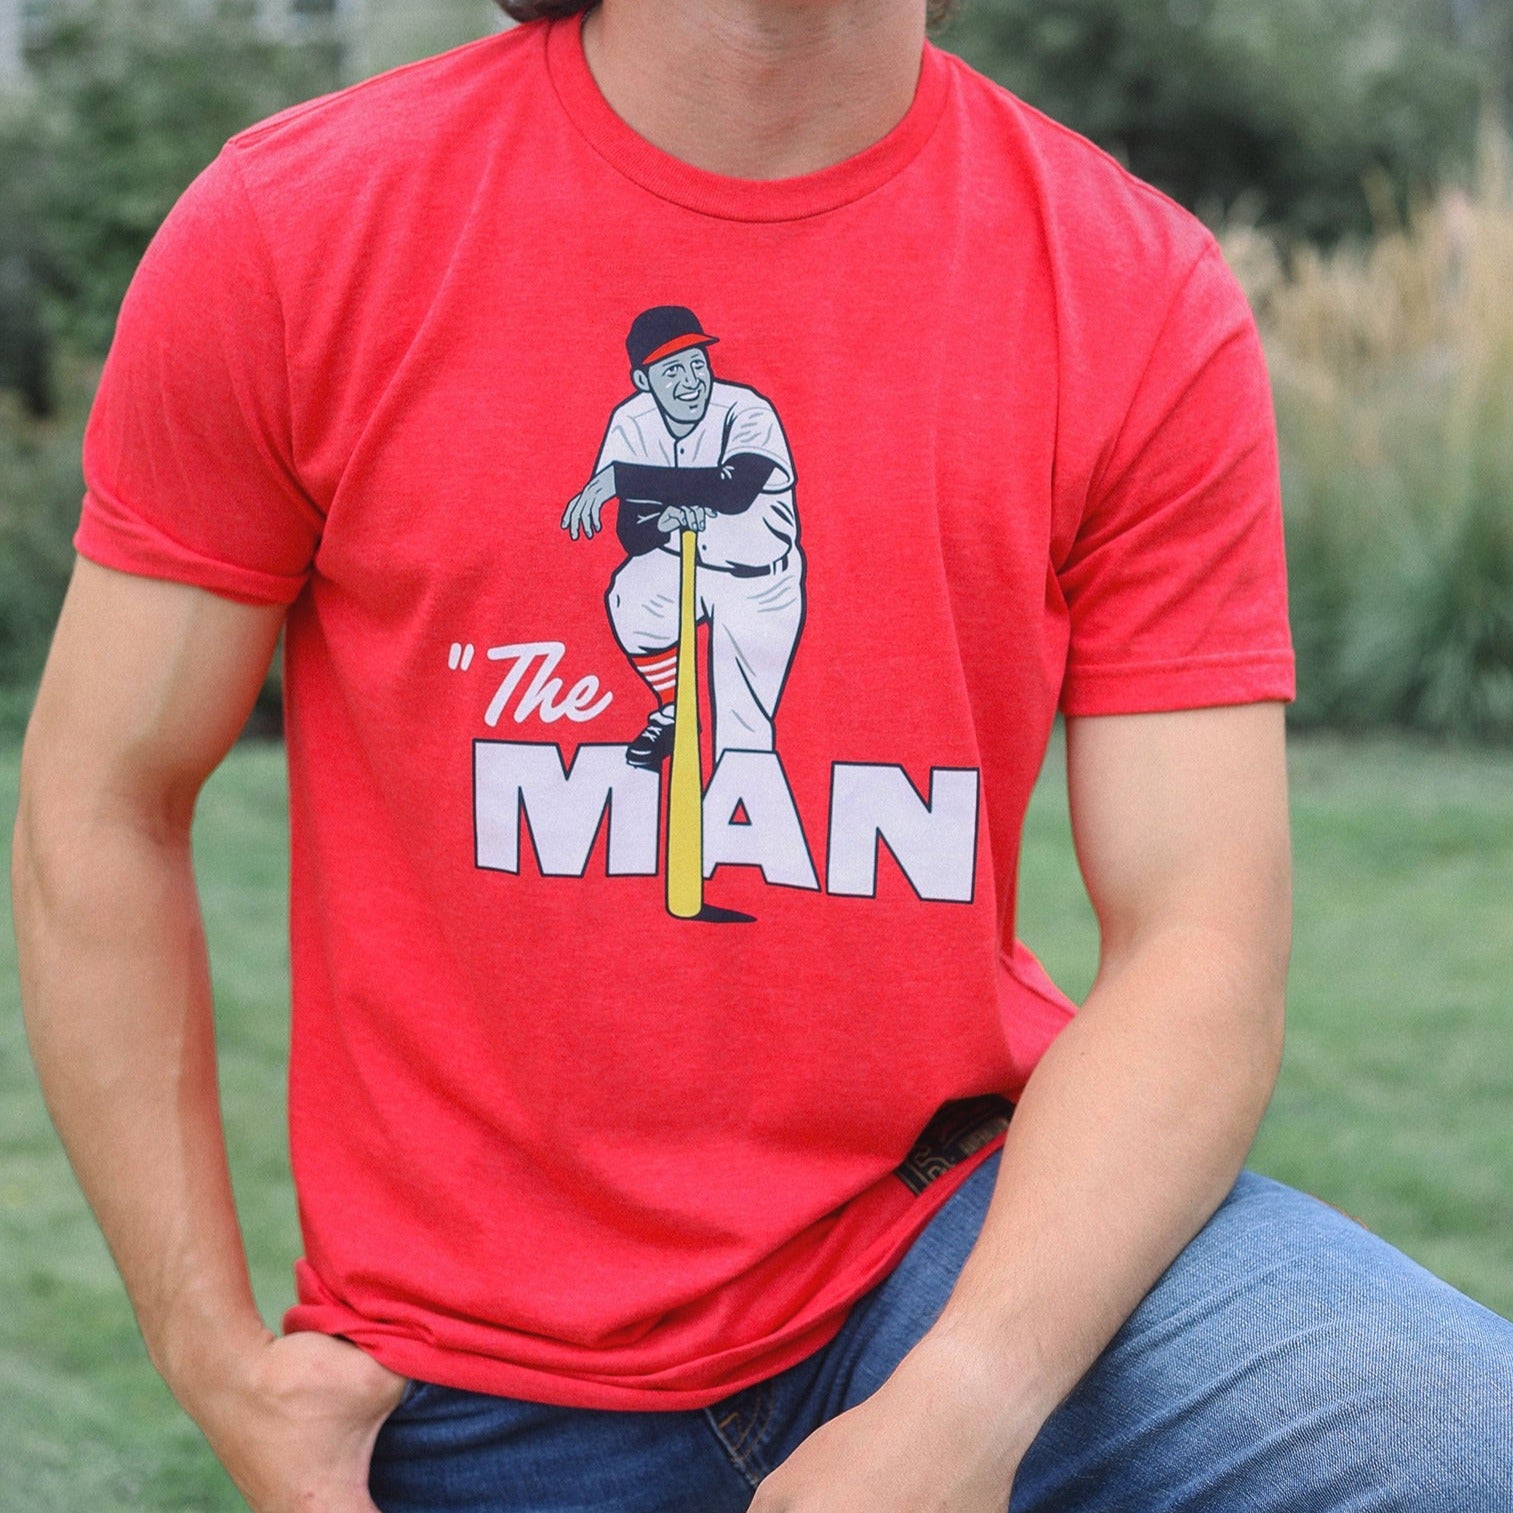 The Man - Stan Musial Collection (Red)